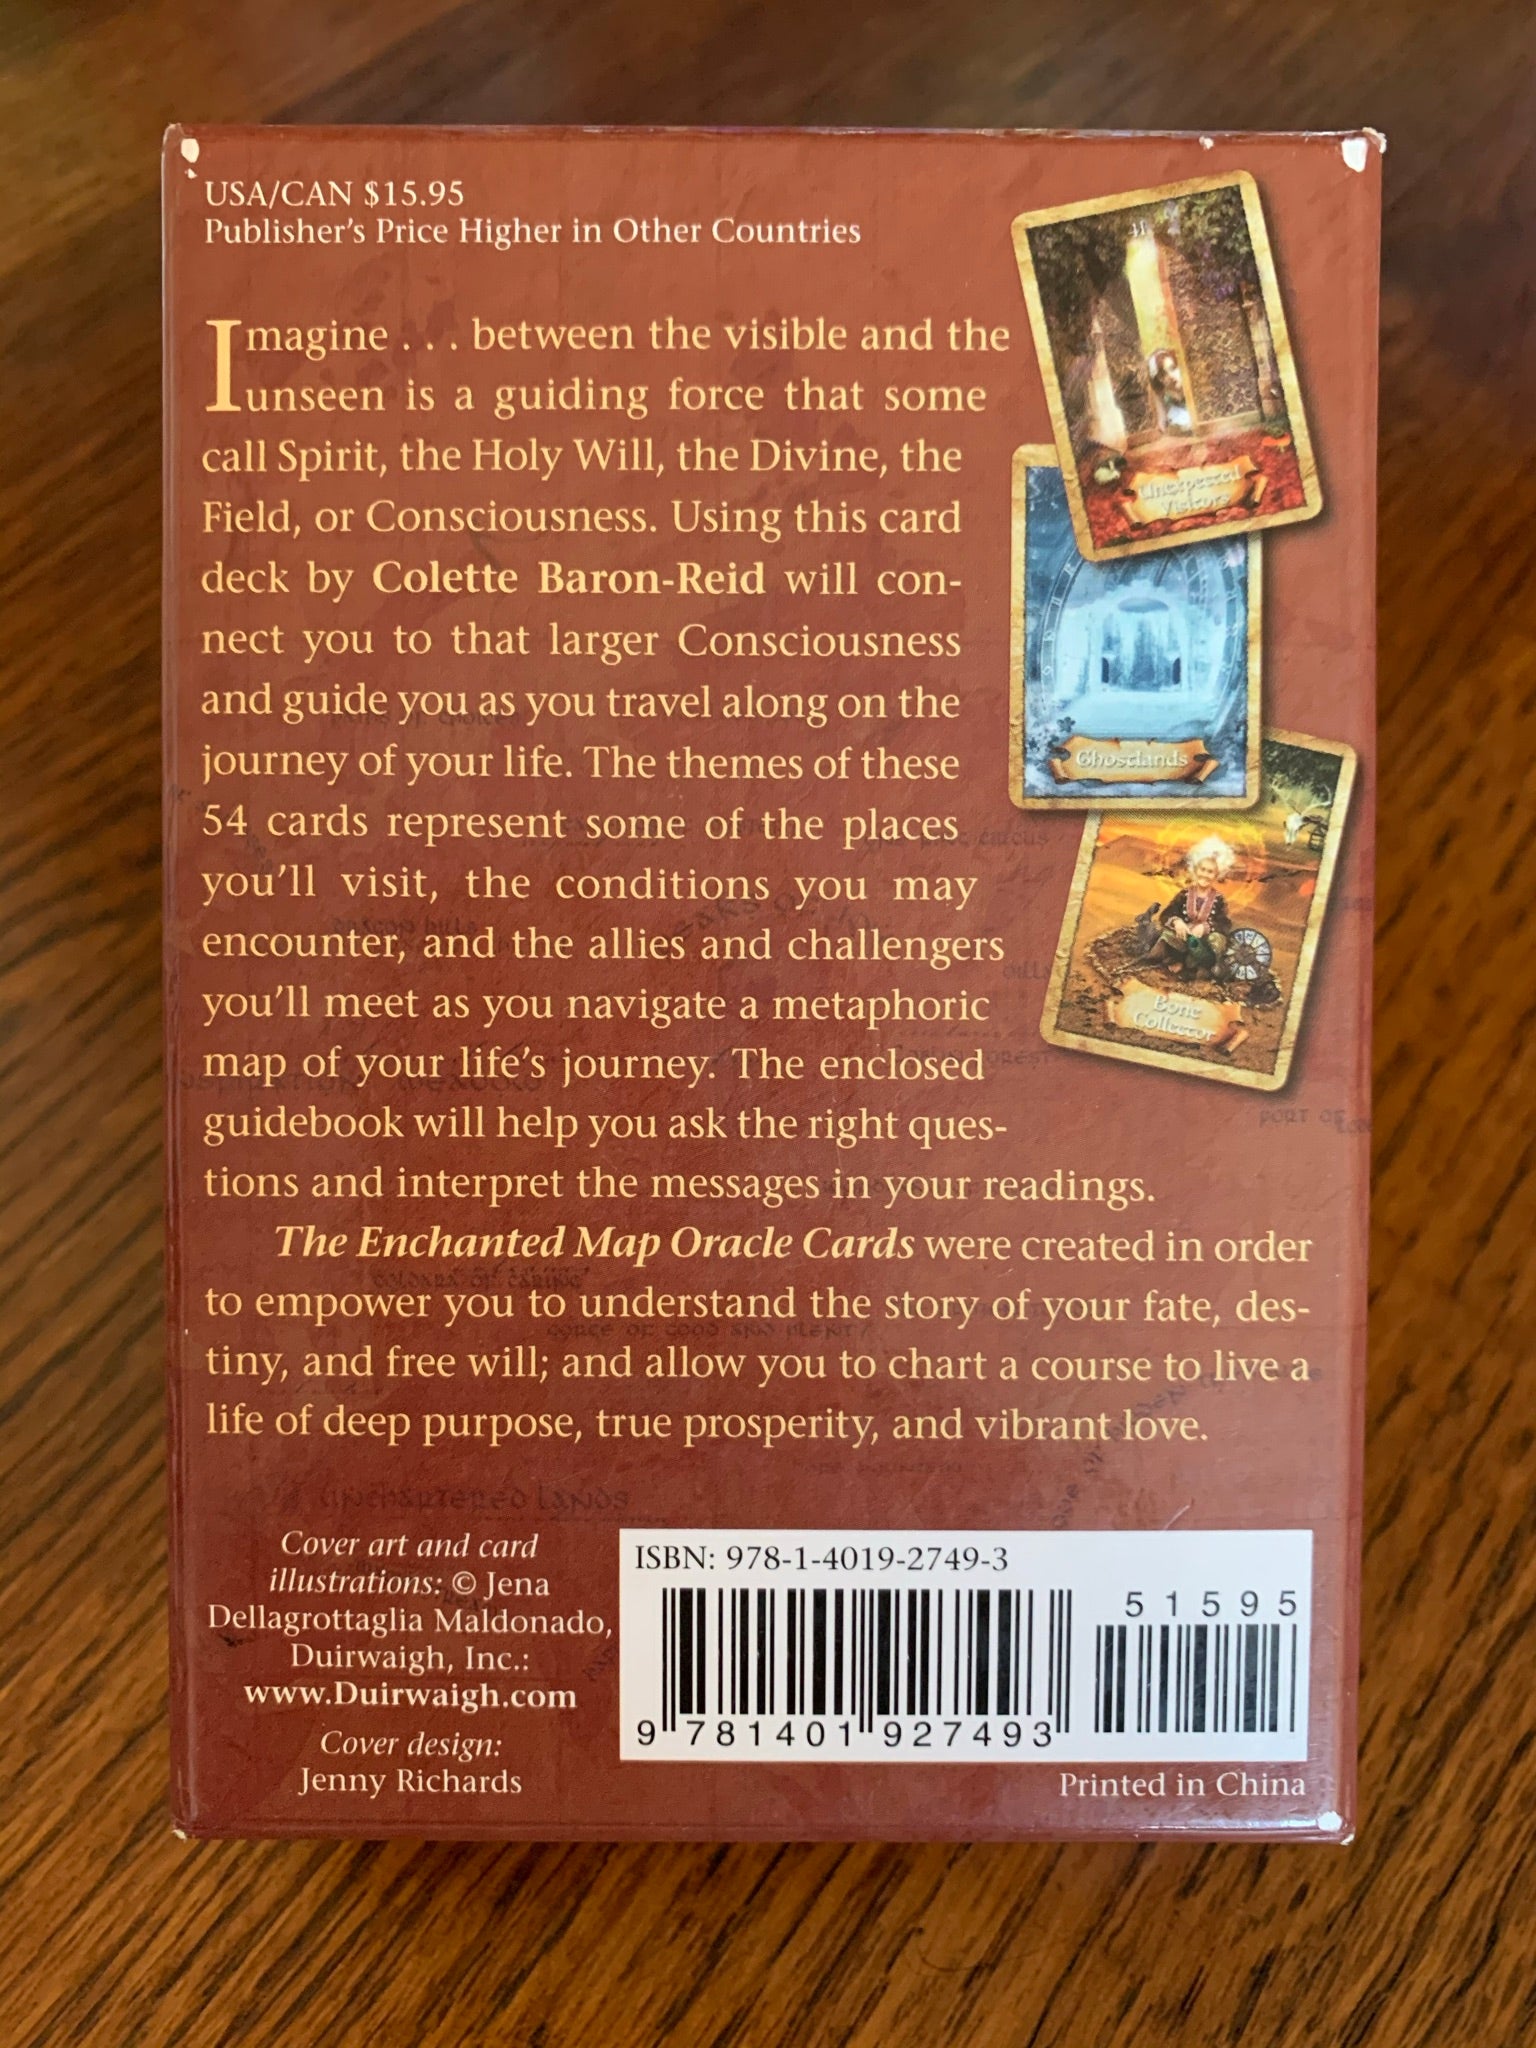 Photo of back of the box. The Enchanted Map Oracle Cards by Colette Baron Reid, includes 54 cards, a guidebook and an box for storing them. An enchanting deck with lovely artwork. Another one of my favorite decks, it gives you the tough answers (e.g. "rock bottom" & "Ghostlands") which are necessary for self-growth and understanding, as well as uplifting messages (e.g. "Coming to Life" & "Peaks of Joy."). Colette Baron-Reid is a psychic medium, intuitive counselor and best-selling author. Price is $21.99.